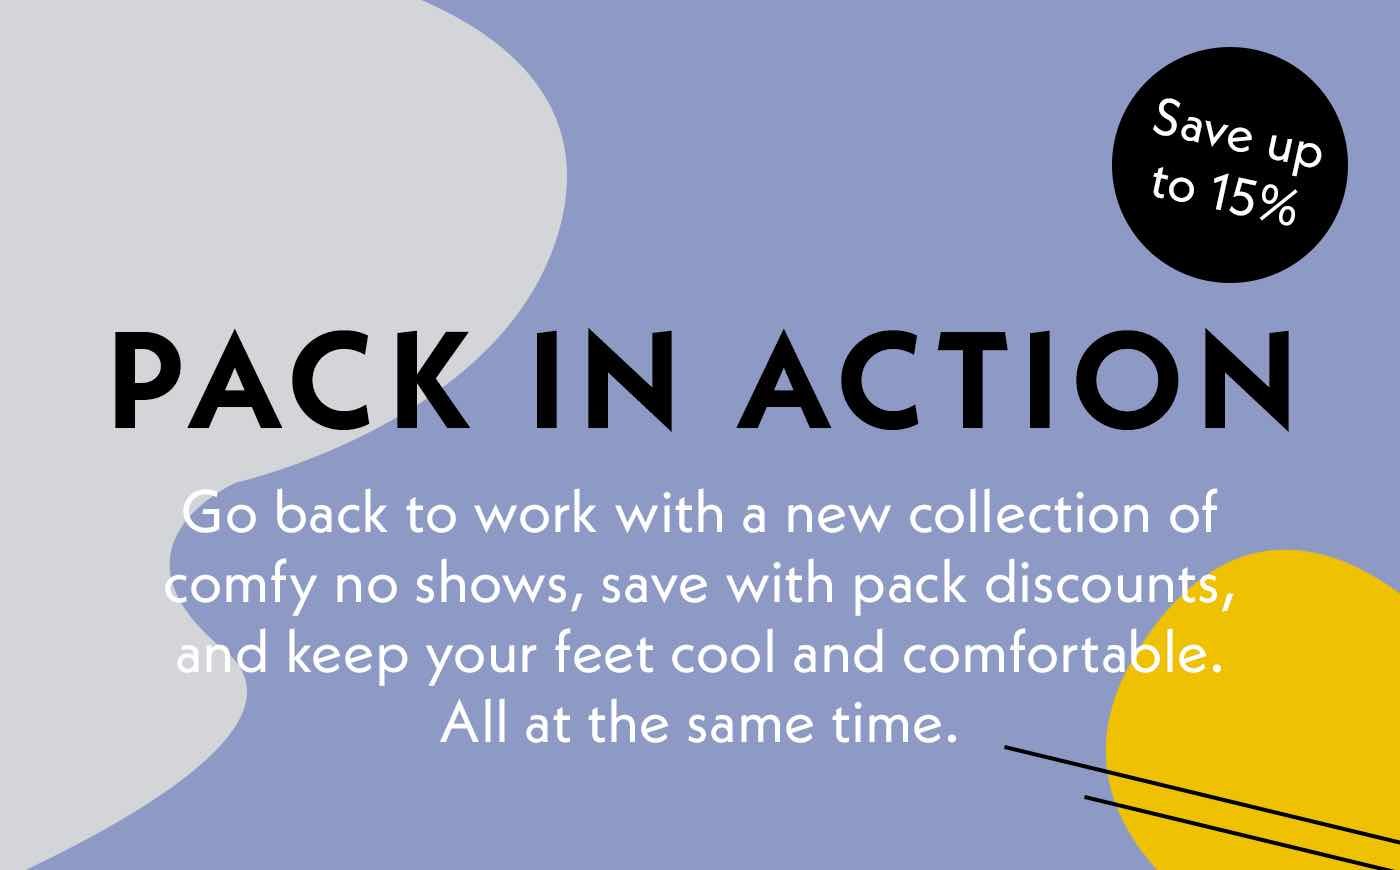 Pack In Action. Go back to work with a new collection of comfy no shows, save with pack discounts, and keep your feet cool and comfortable. All at the same time.